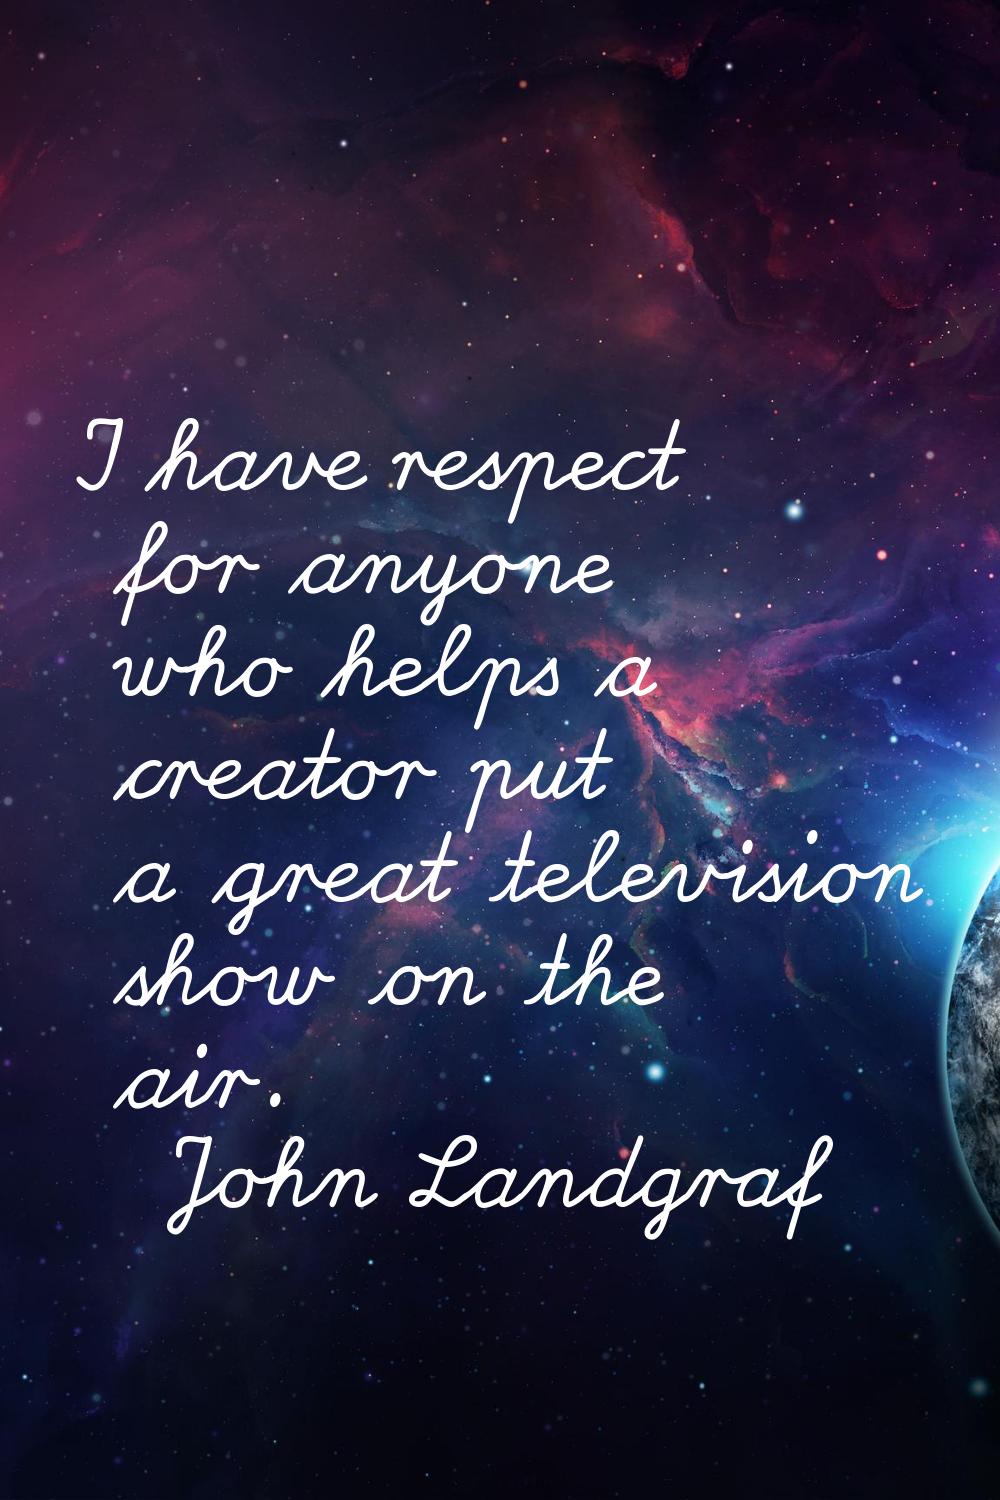 I have respect for anyone who helps a creator put a great television show on the air.